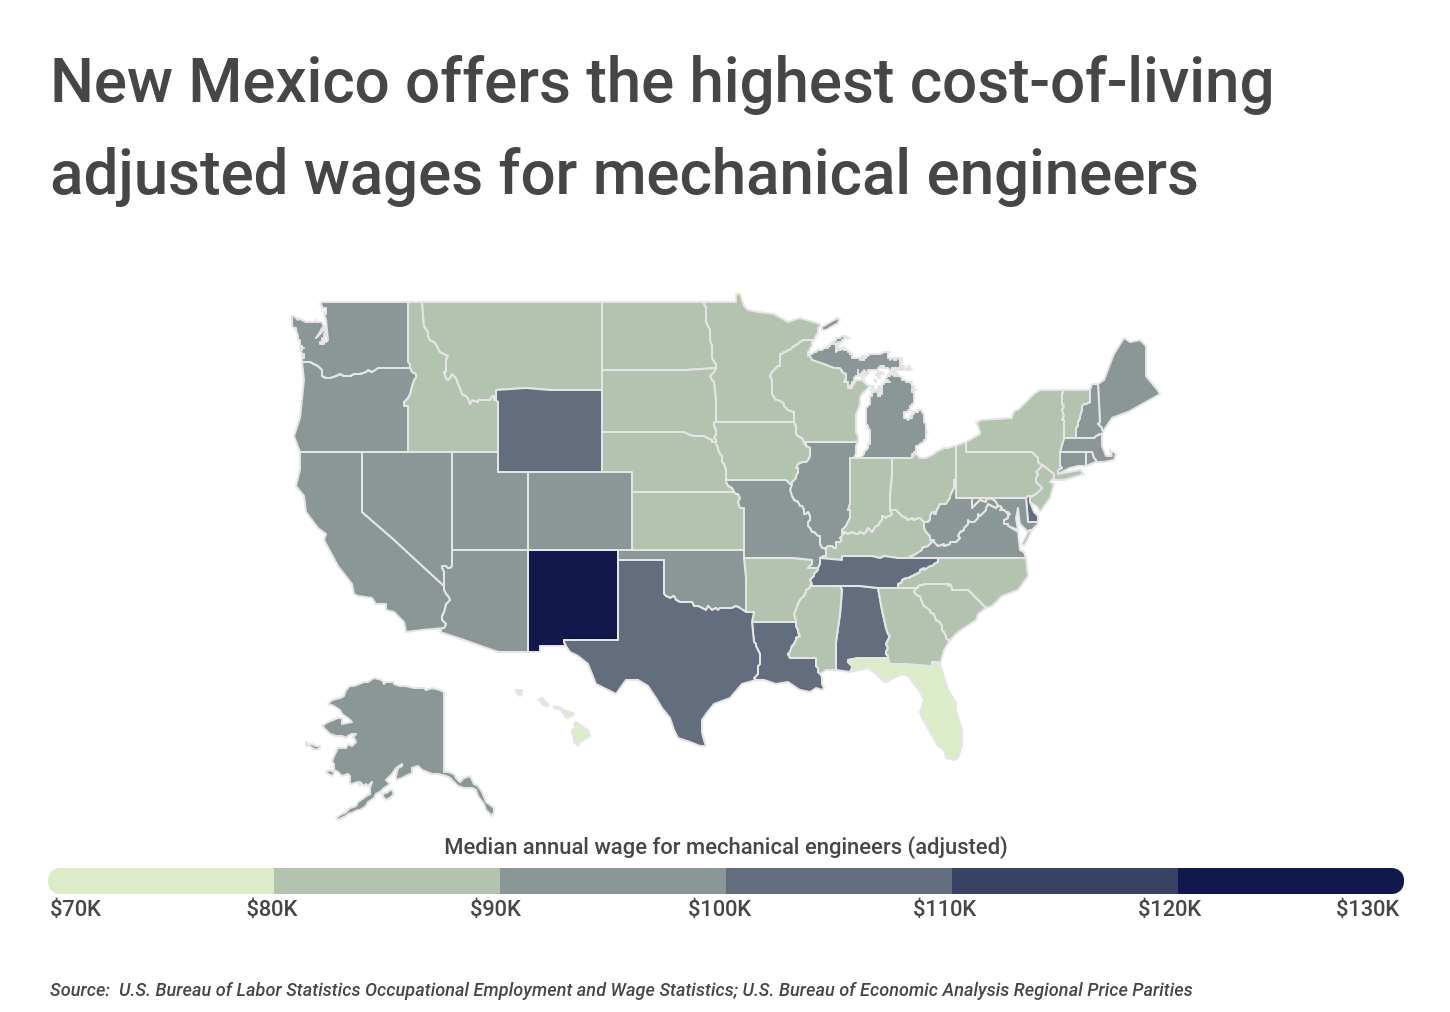 Chart3_NM offers the highest adjusted wages for mechanical engineers